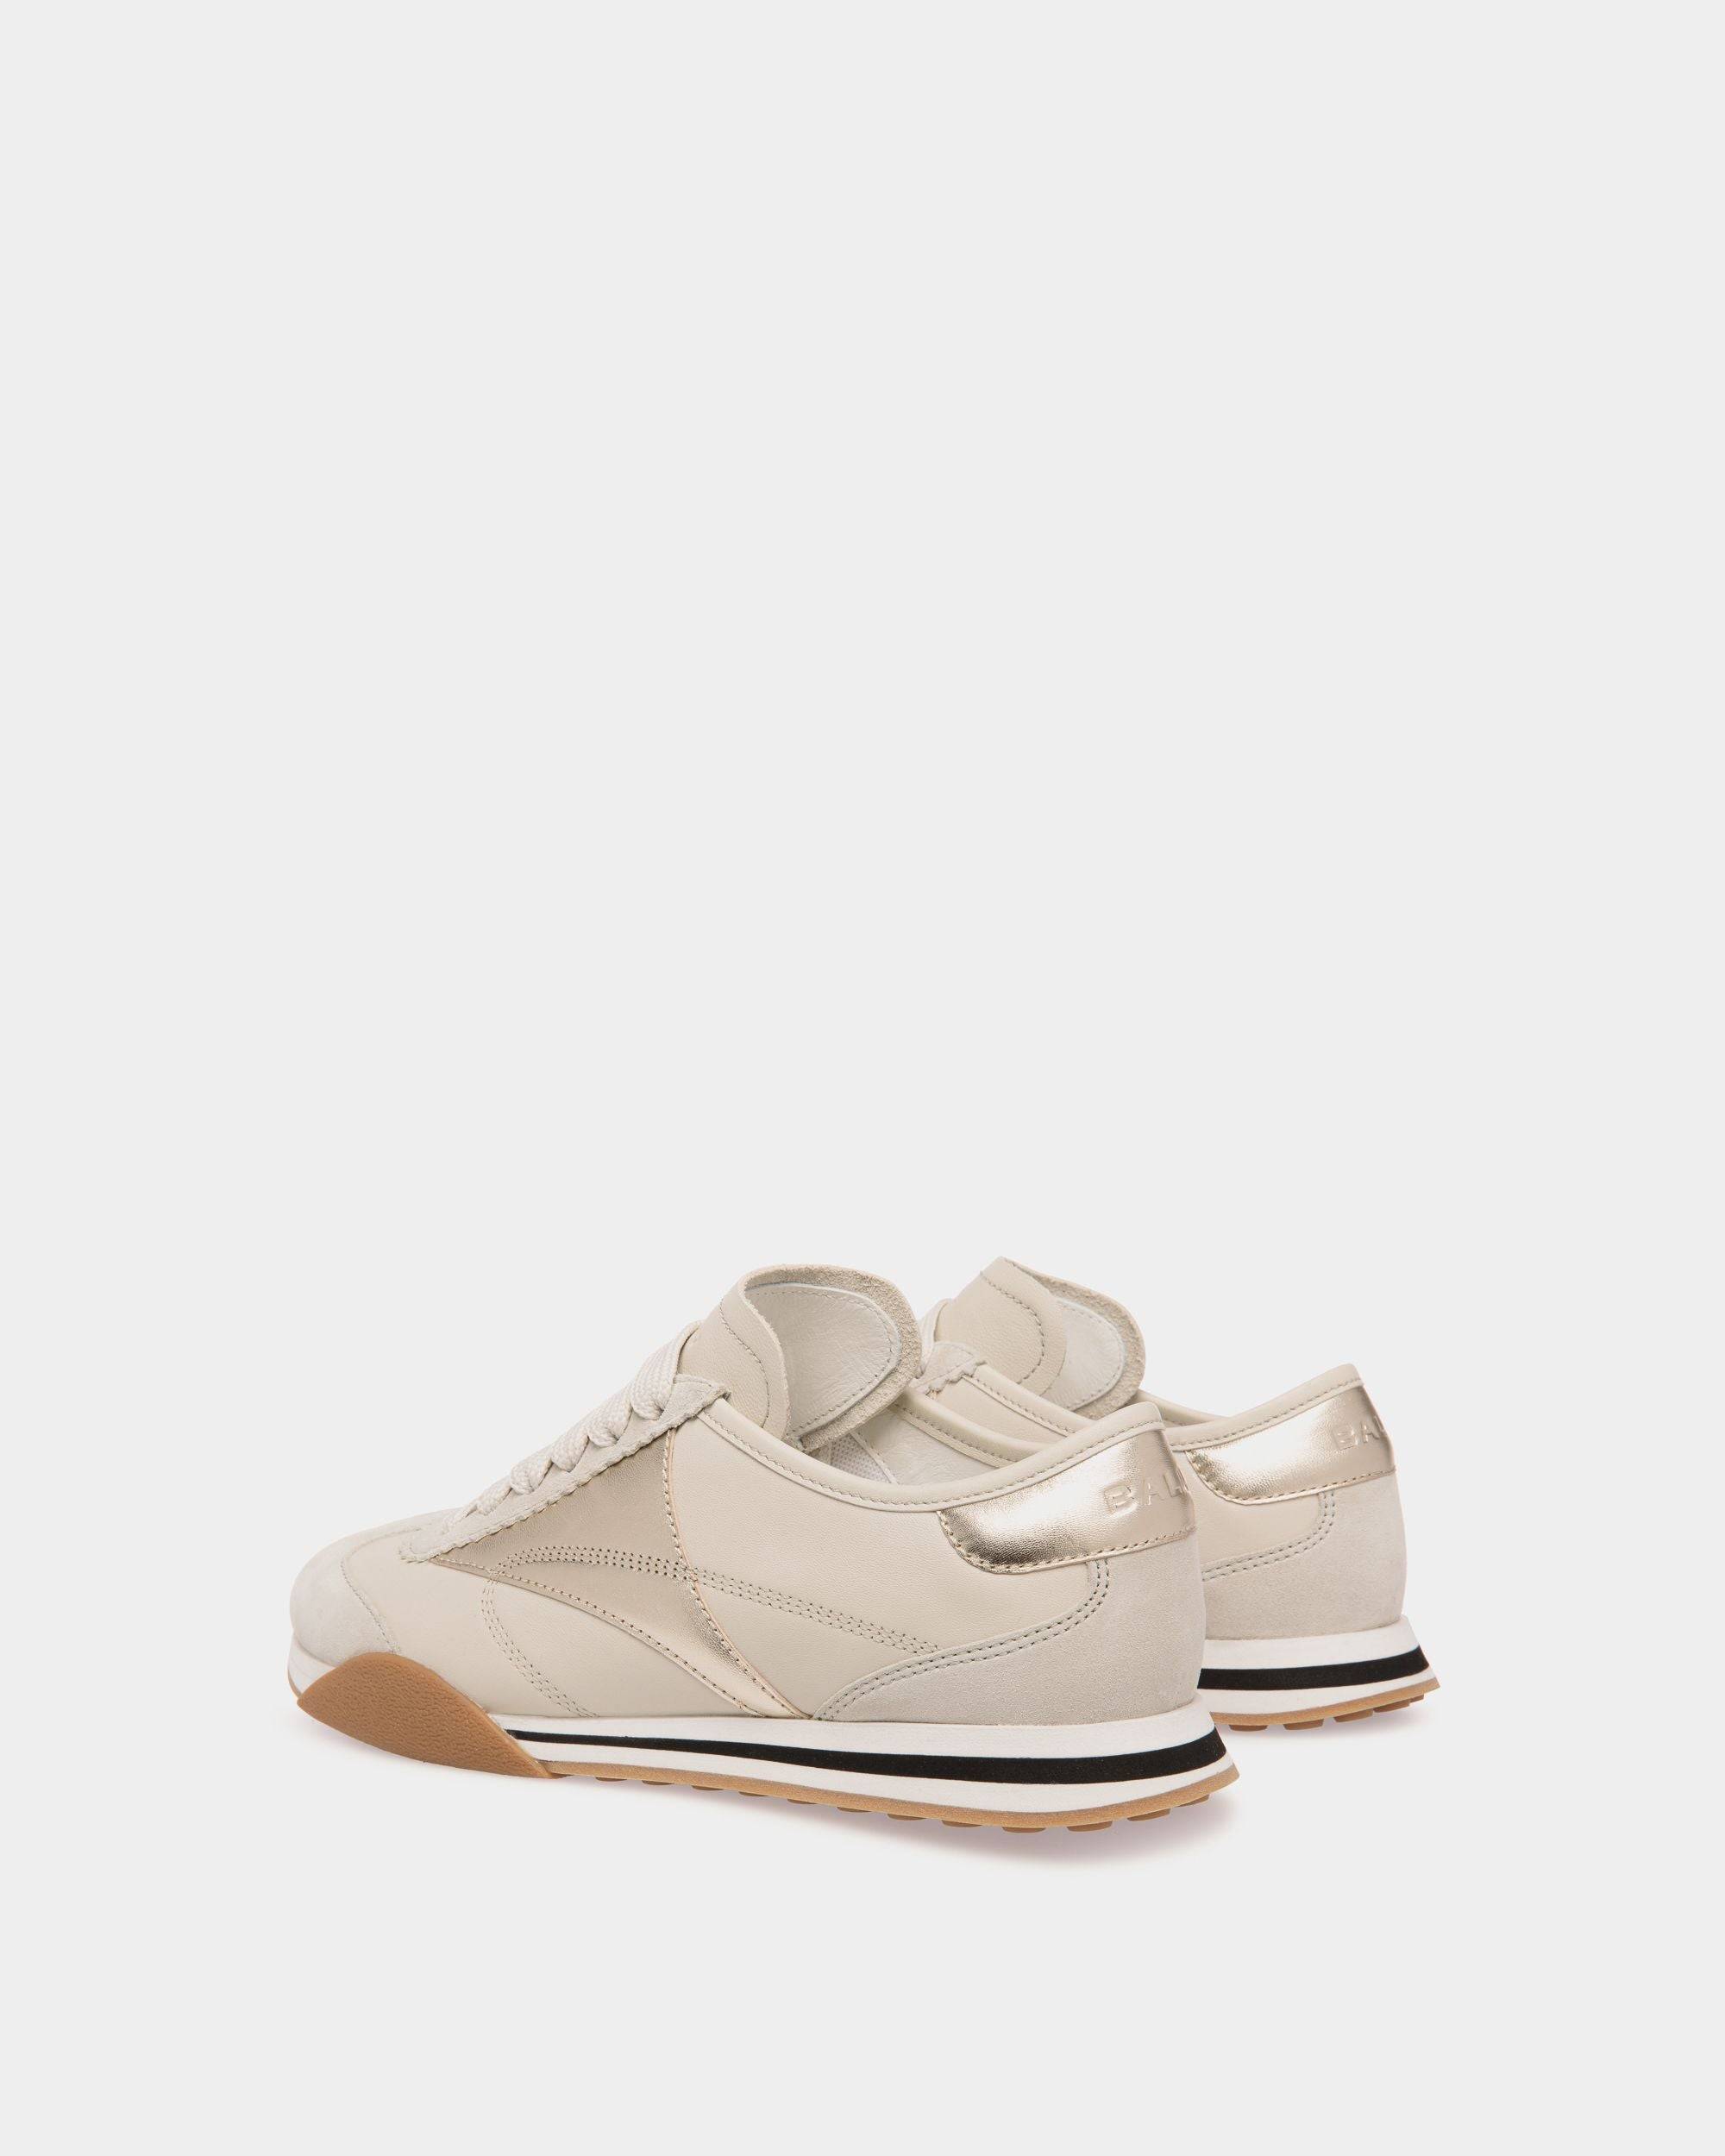 Sussex Sneaker In White And Gold Leather - Women's - Bally - 03